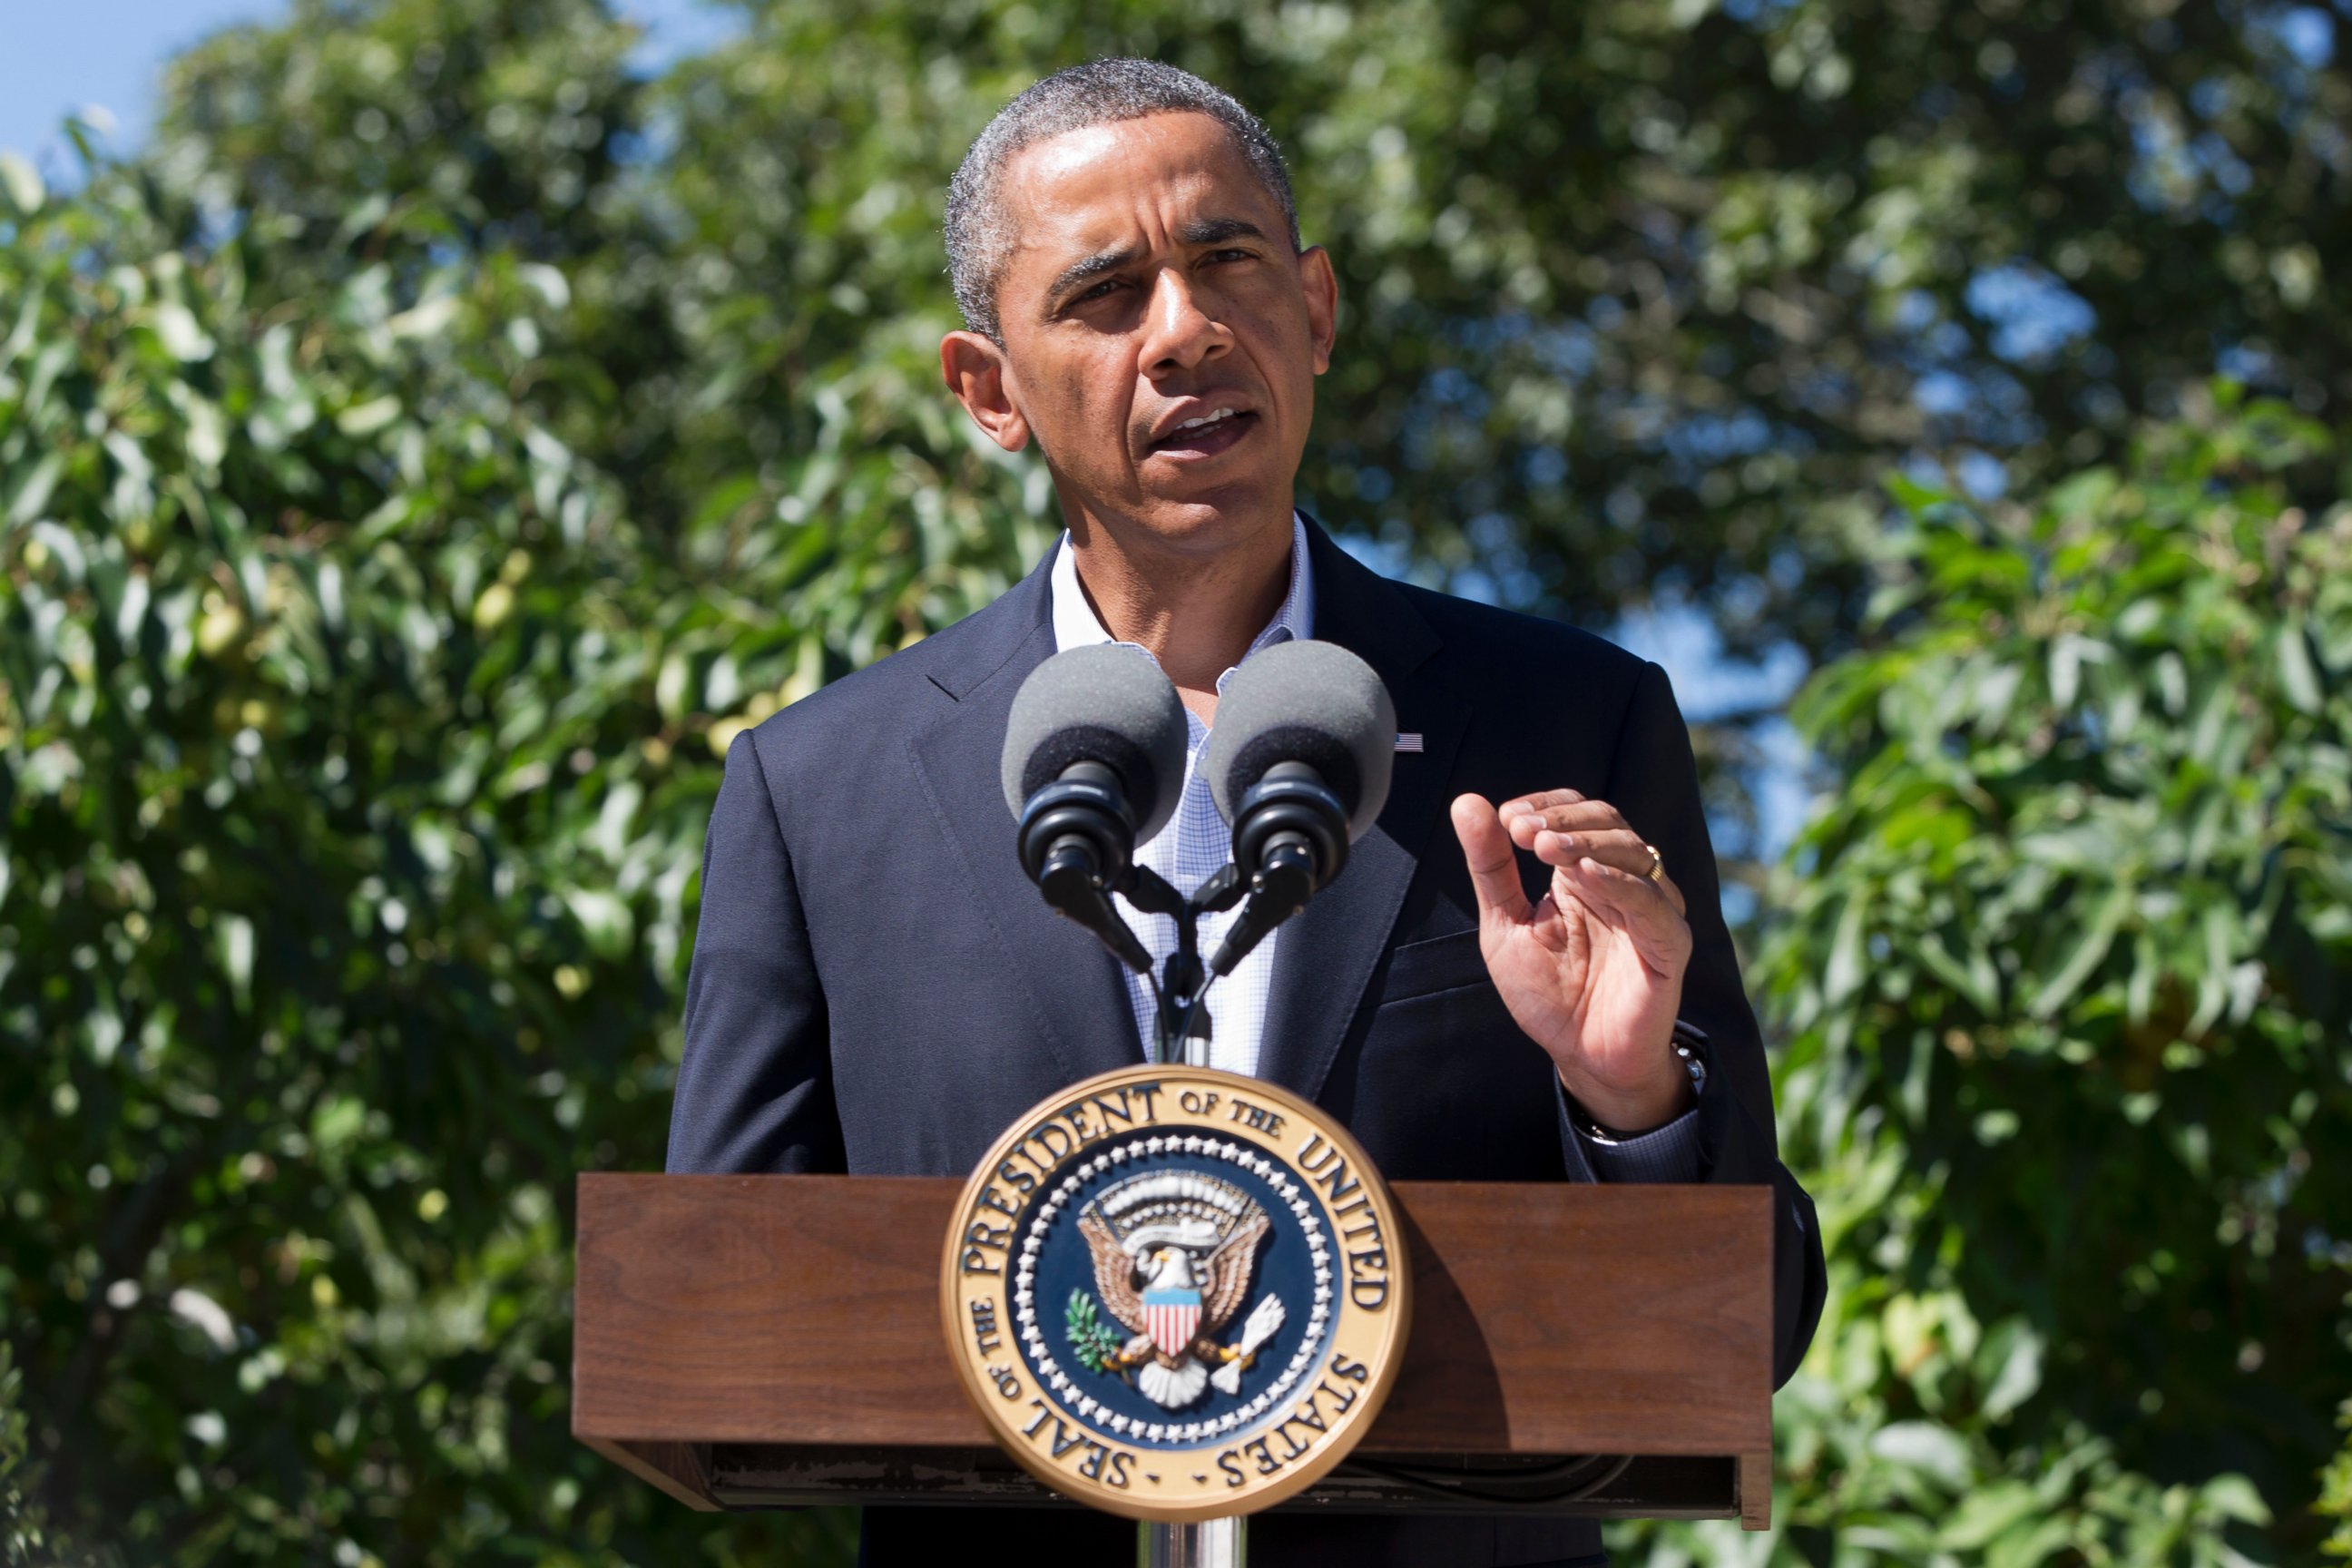 PHOTO: President Barack Obama makes a statement to the media regarding events in Egypt, from his rental vacation home in Chilmark Mass., on the island of Martha's Vineyard, Aug. 15, 2013.